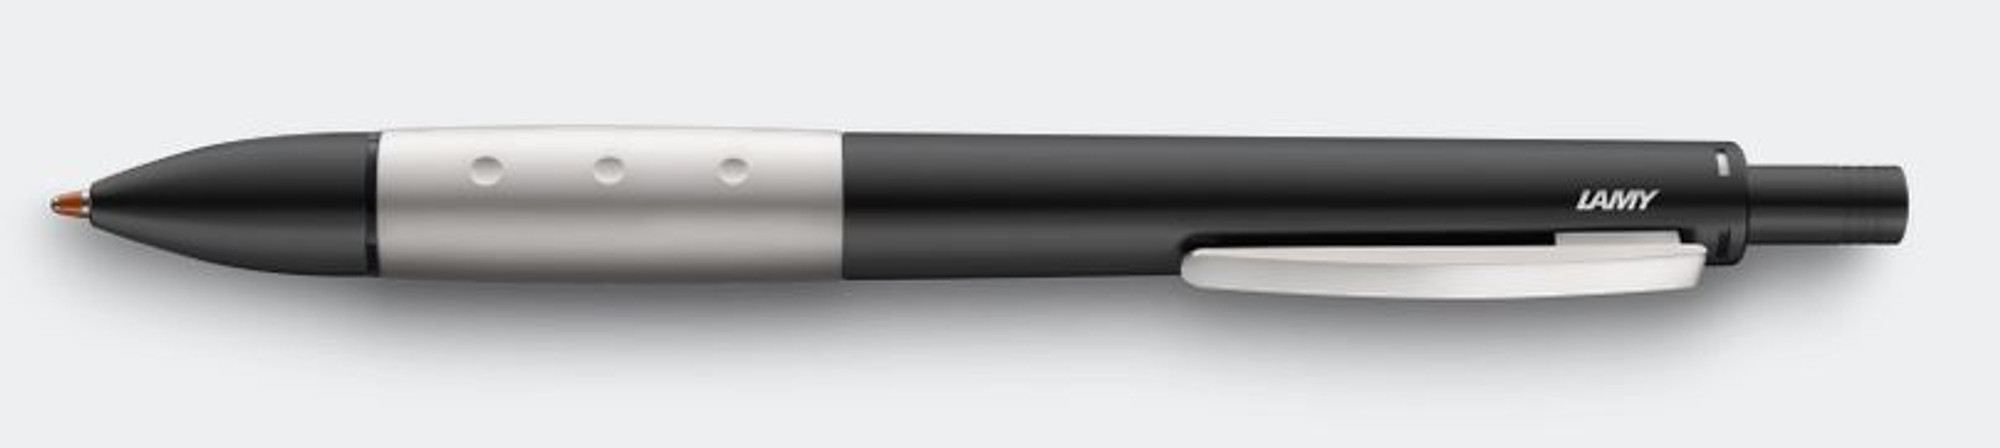 Lamy Accent 3+1 Multisystem - Black Lacquer With Aluminum Grip